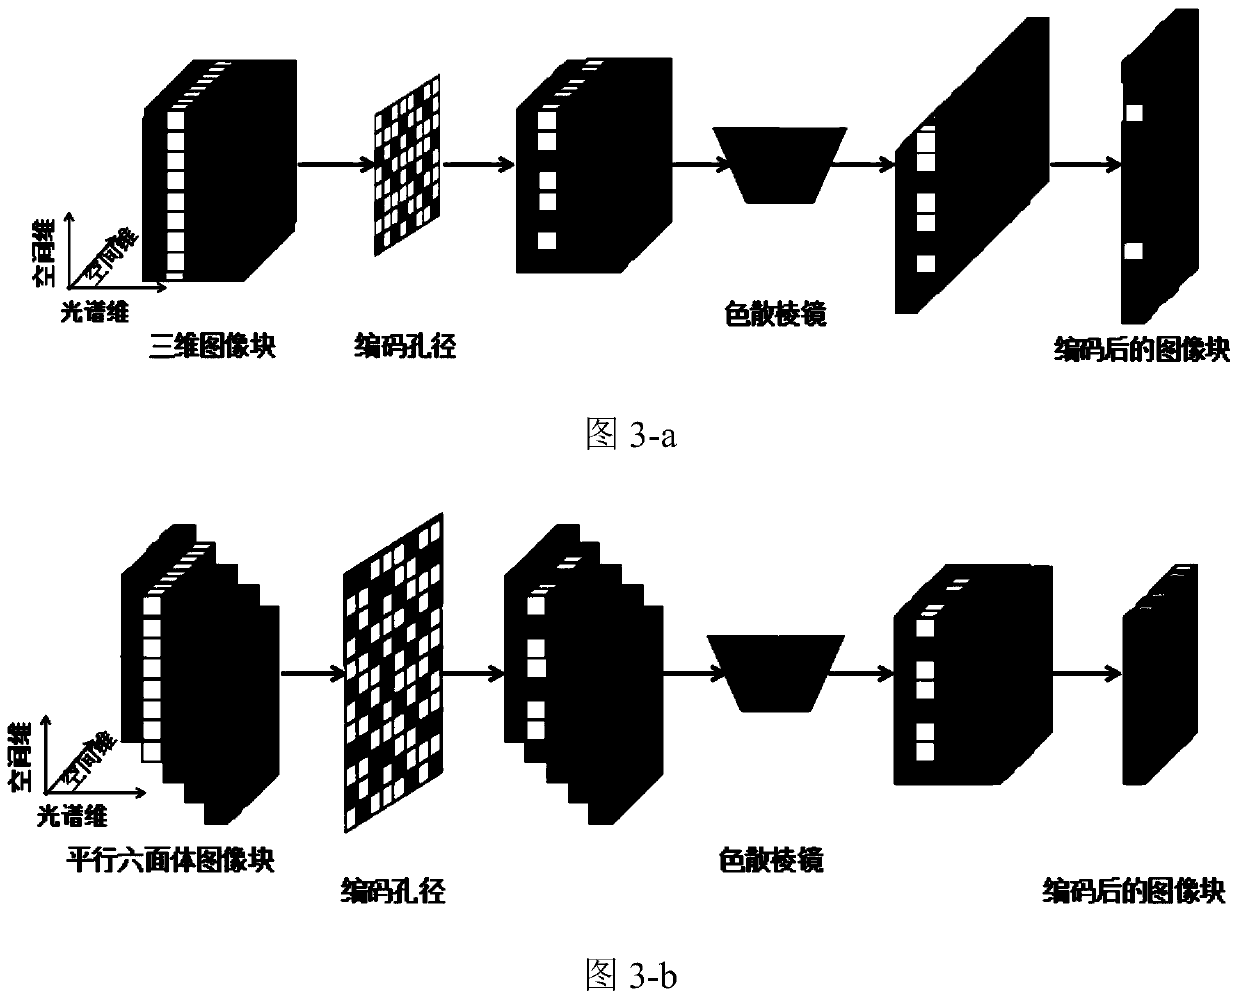 A high-quality reconstruction method of a spectral imaging system based on a convolutional neural network